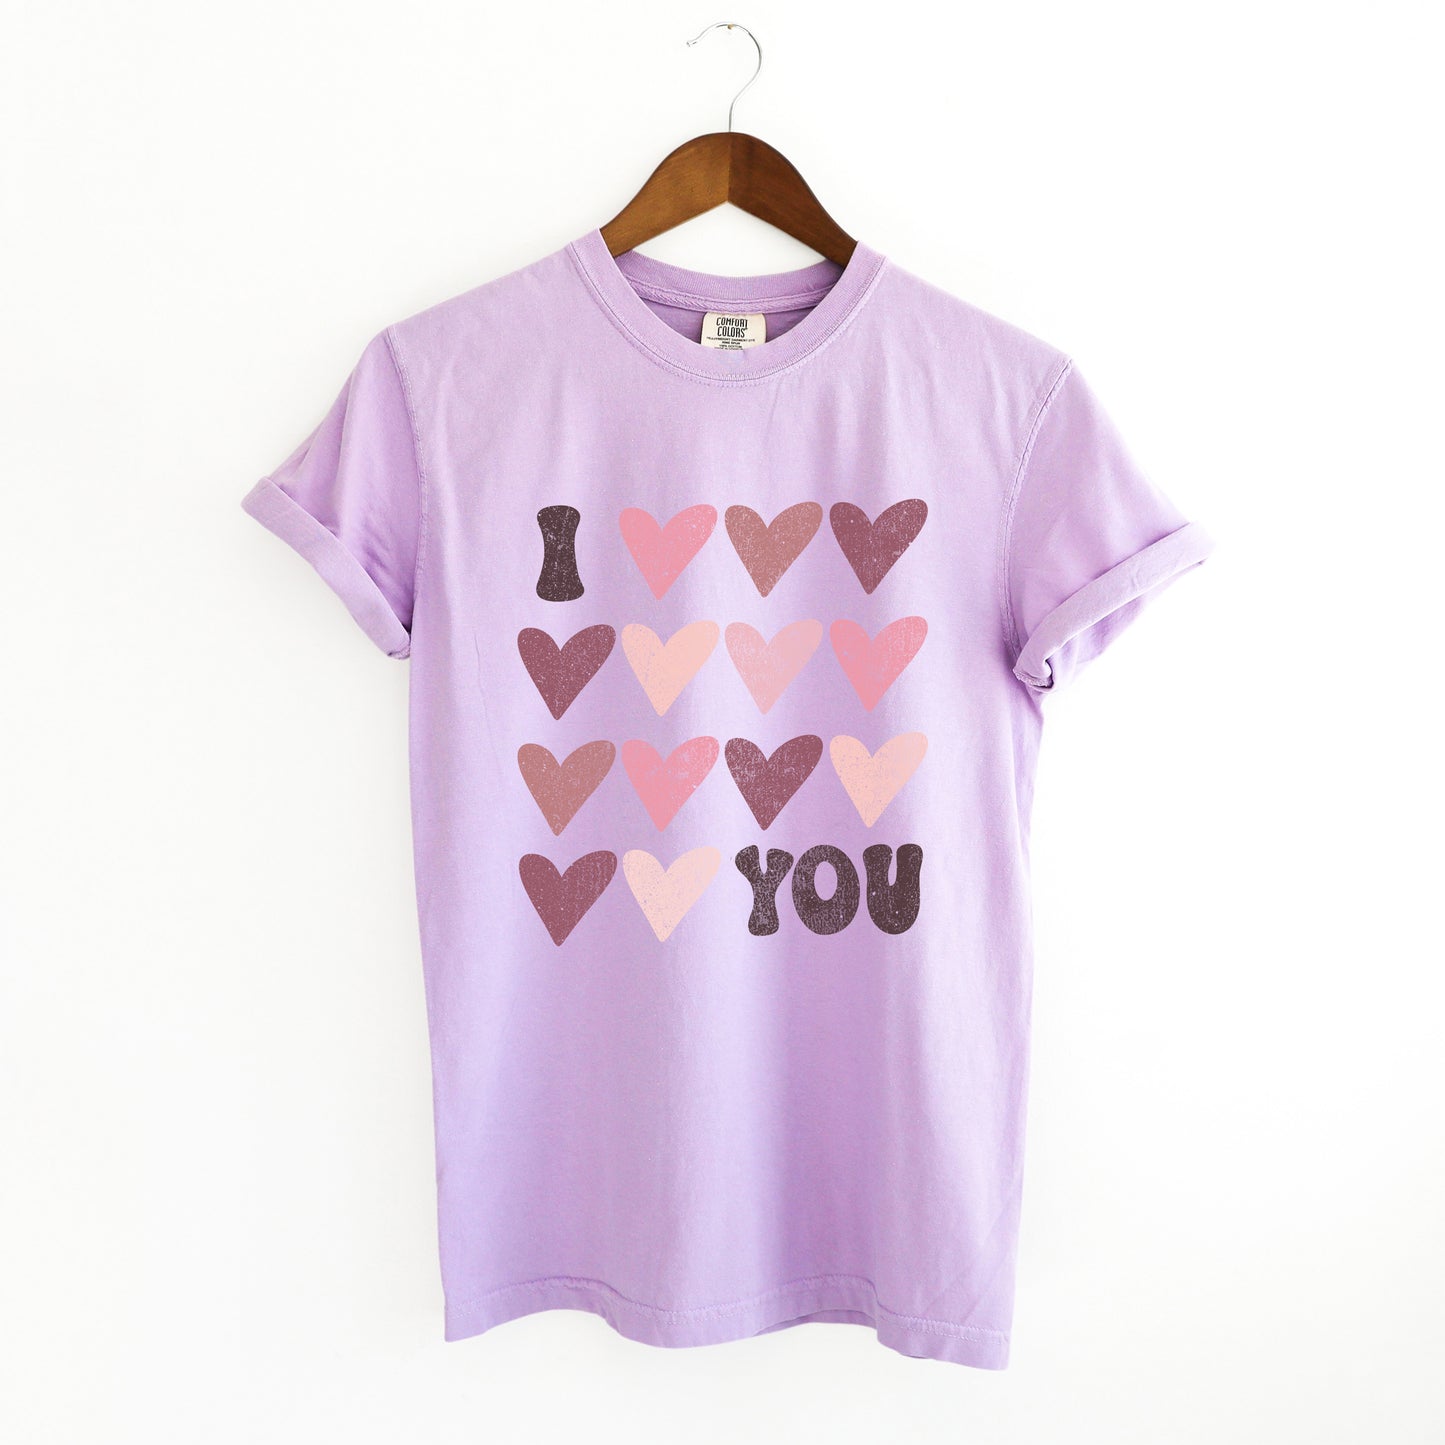 I Heart You Distressed | Garment Dyed Tee